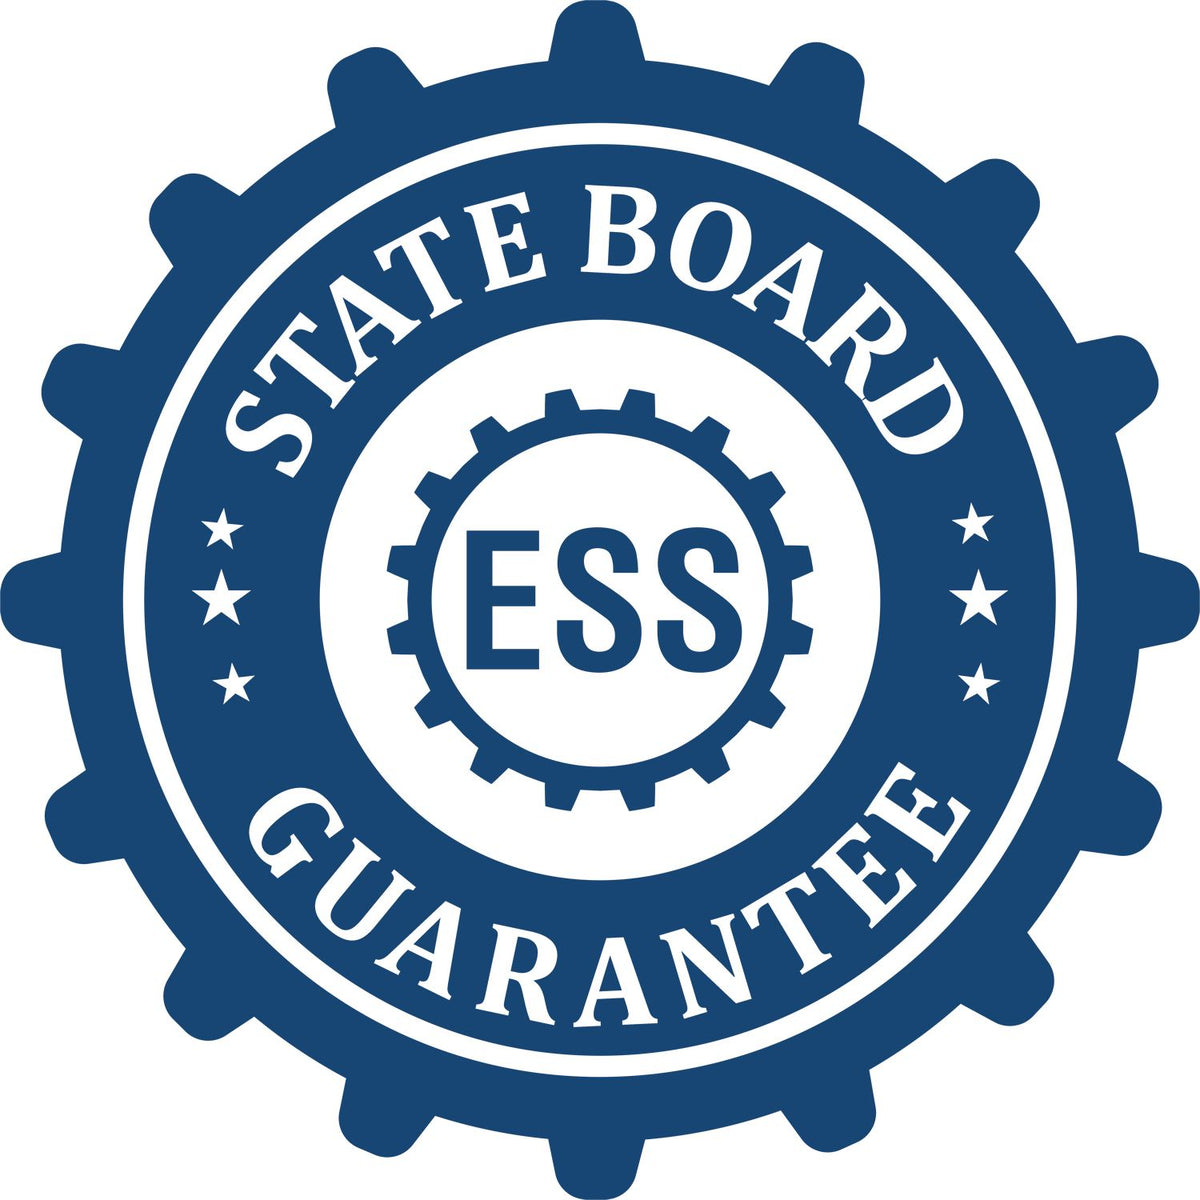 An emblem in a gear shape illustrating a state board guarantee for the State of Pennsylvania Long Reach Architectural Embossing Seal product.